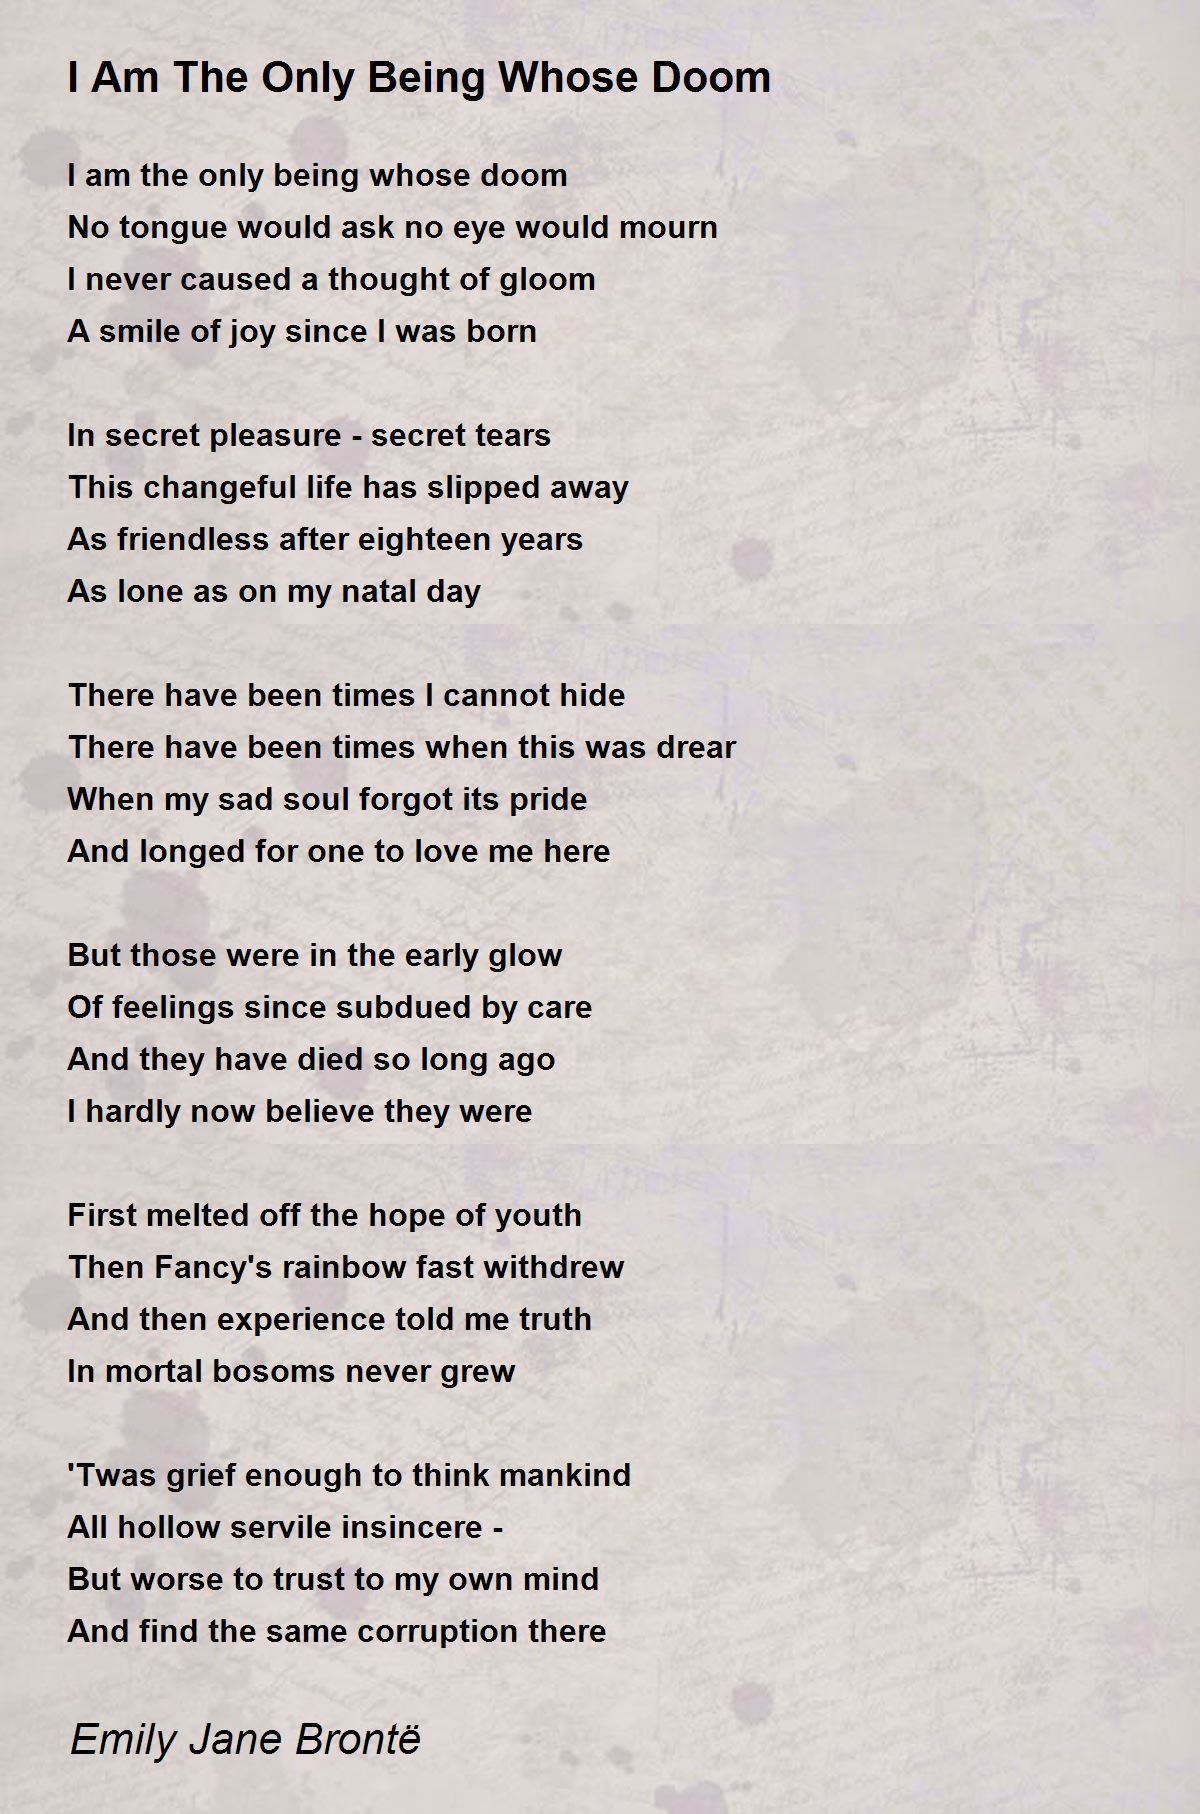 I Am The Only Being Whose Doom Poem by Emily Jane Brontë ...